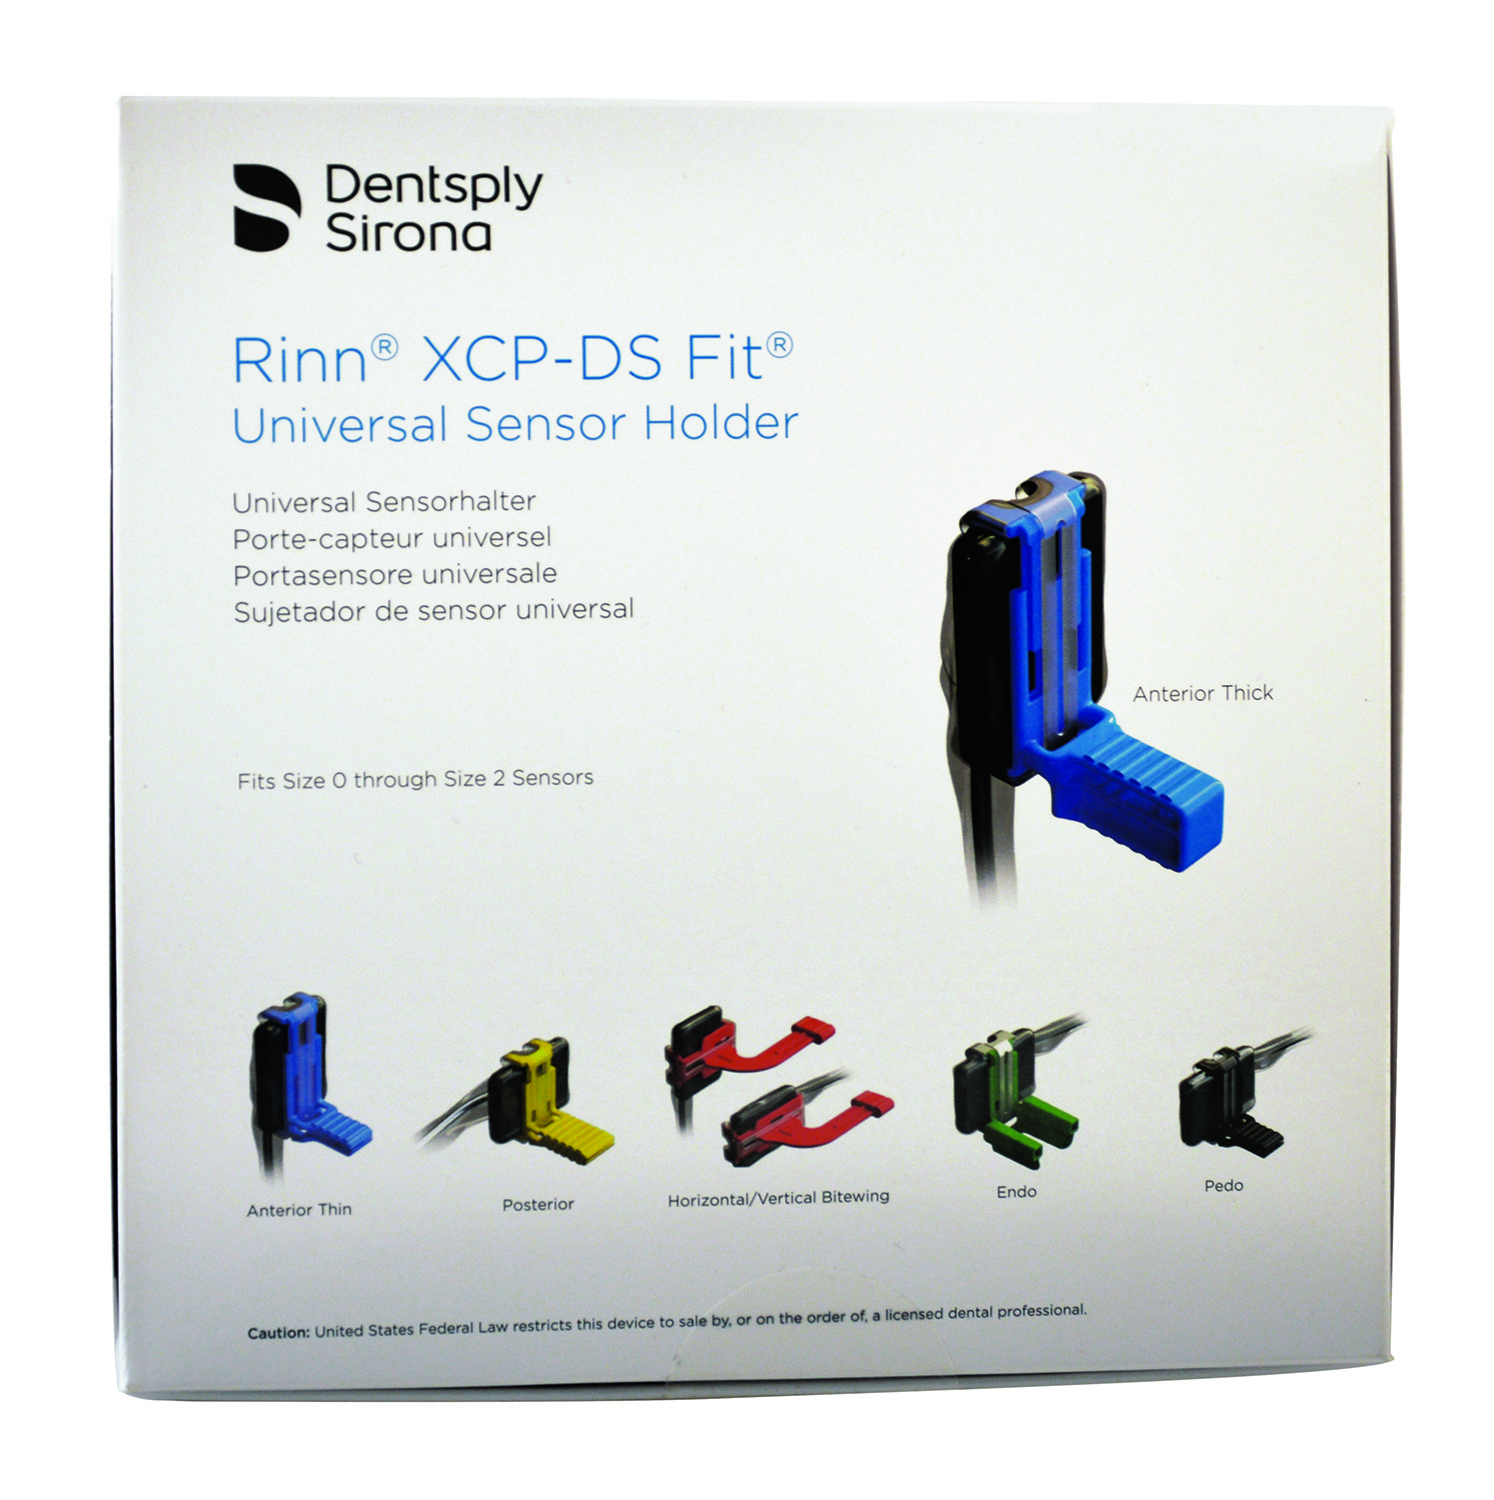 Xcp-Ds Fit Complete Kit Rinn/Dentsply